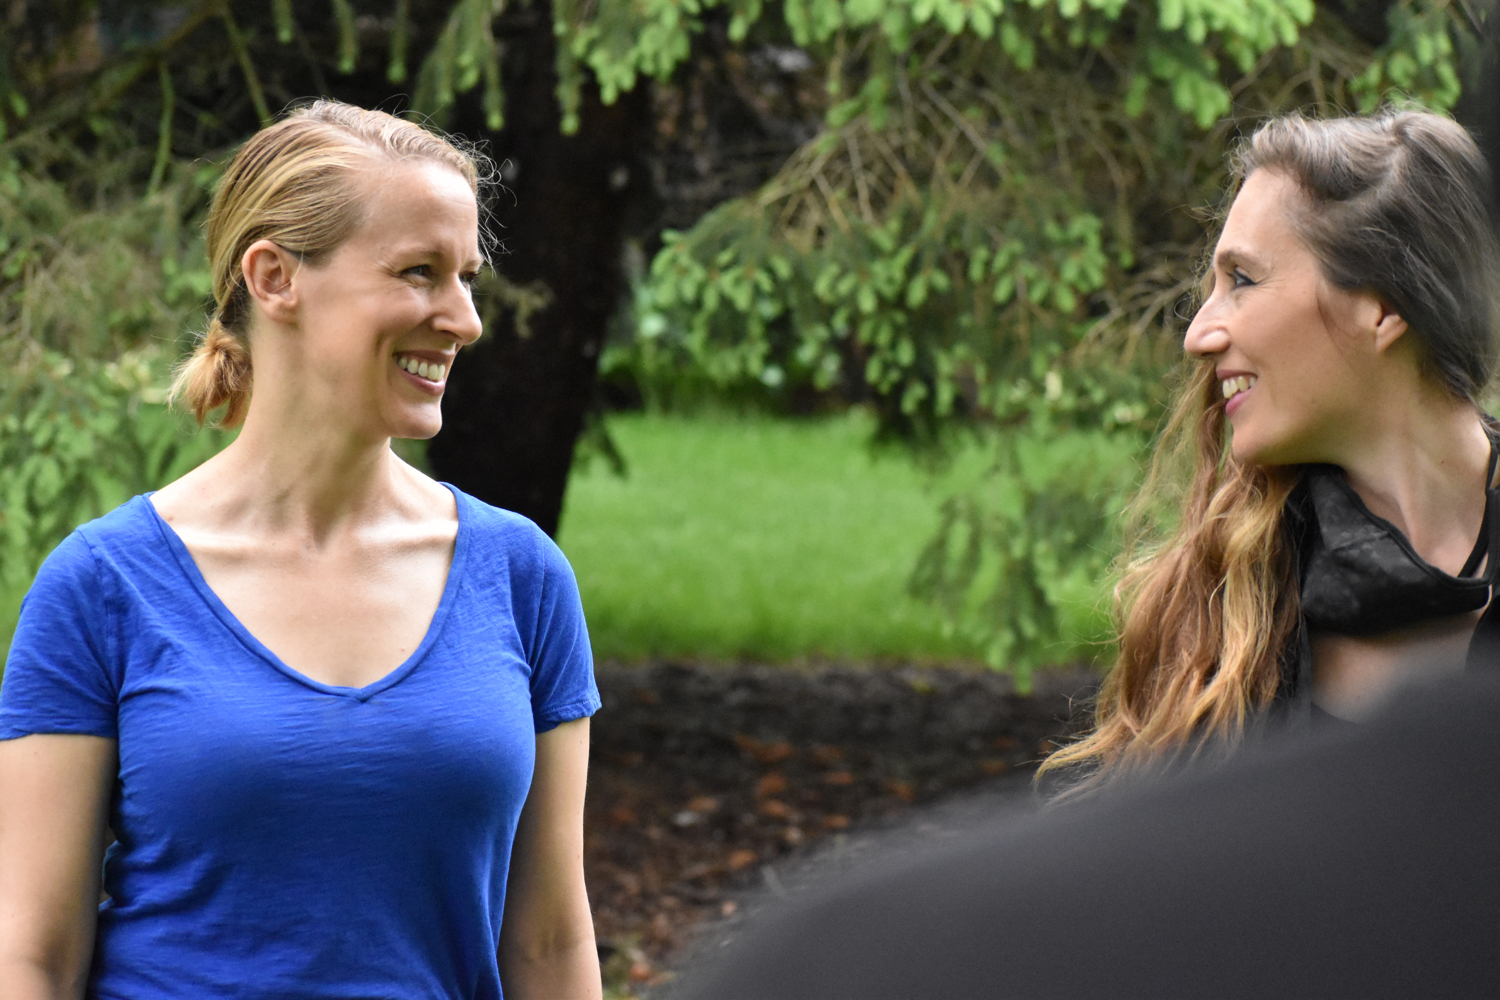 Two women actors smile while doing an activity outdoors